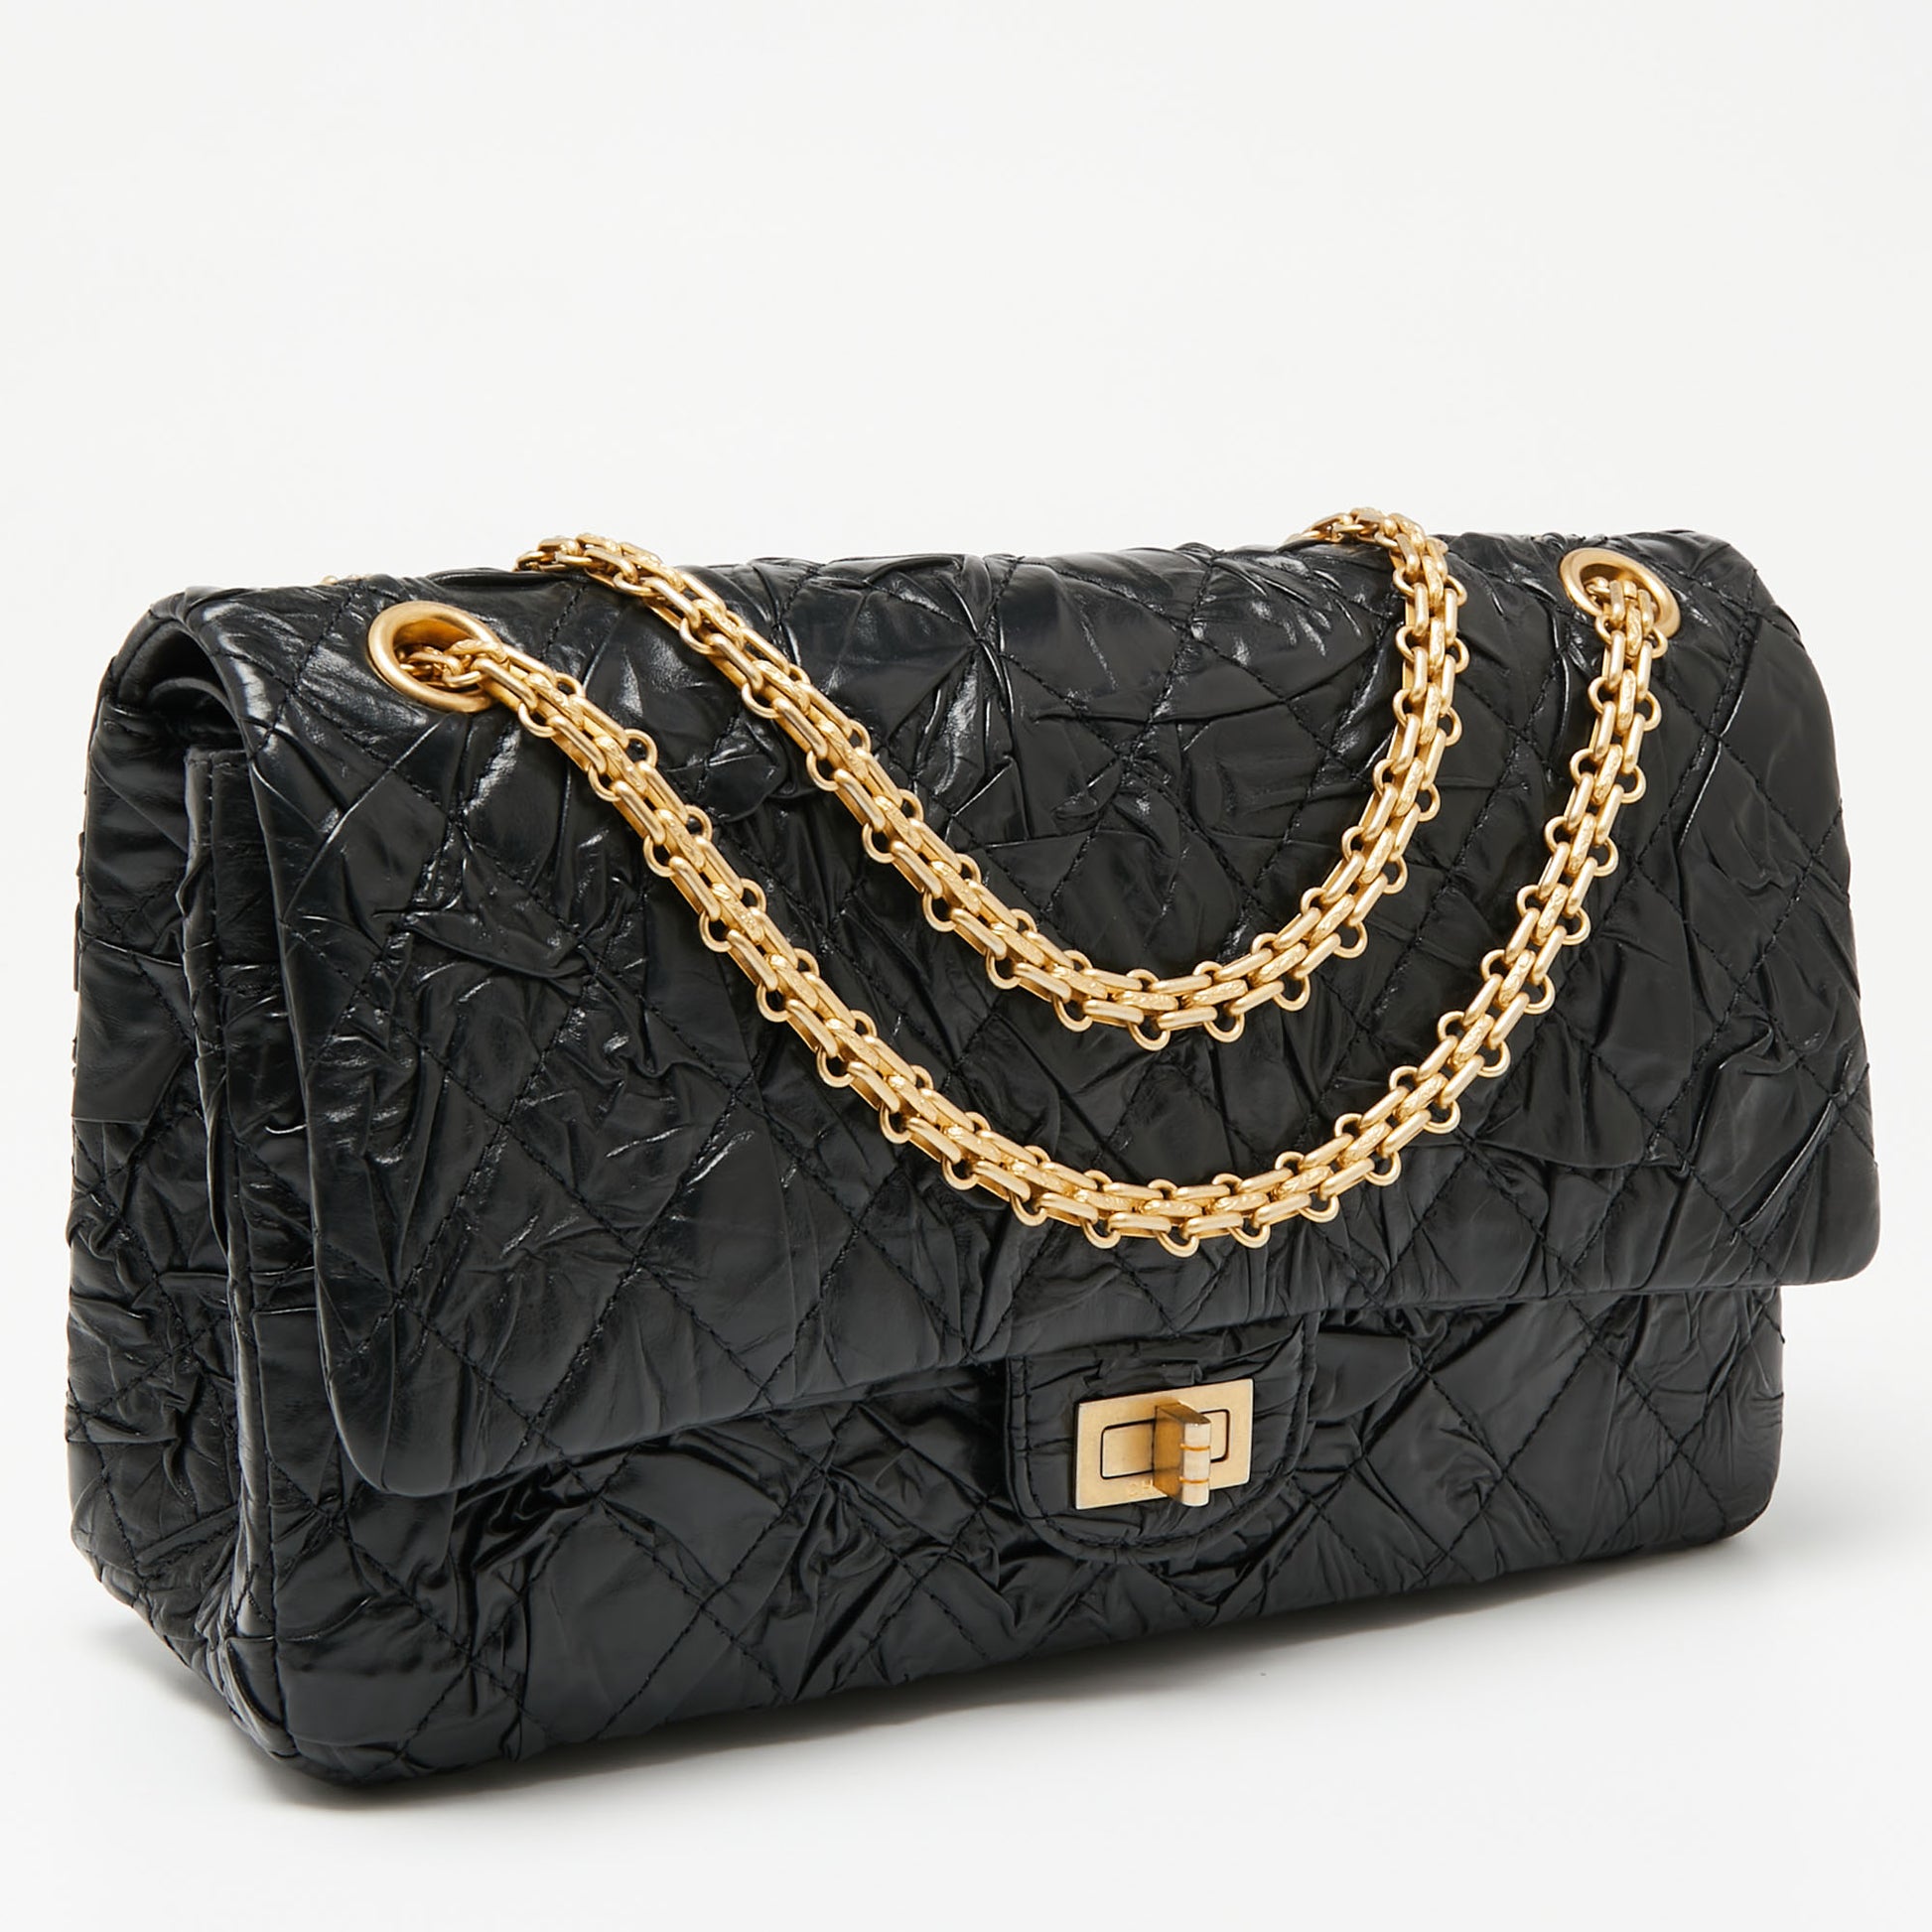 CHANEL 2.55 Leather Bags & Handbags for Women